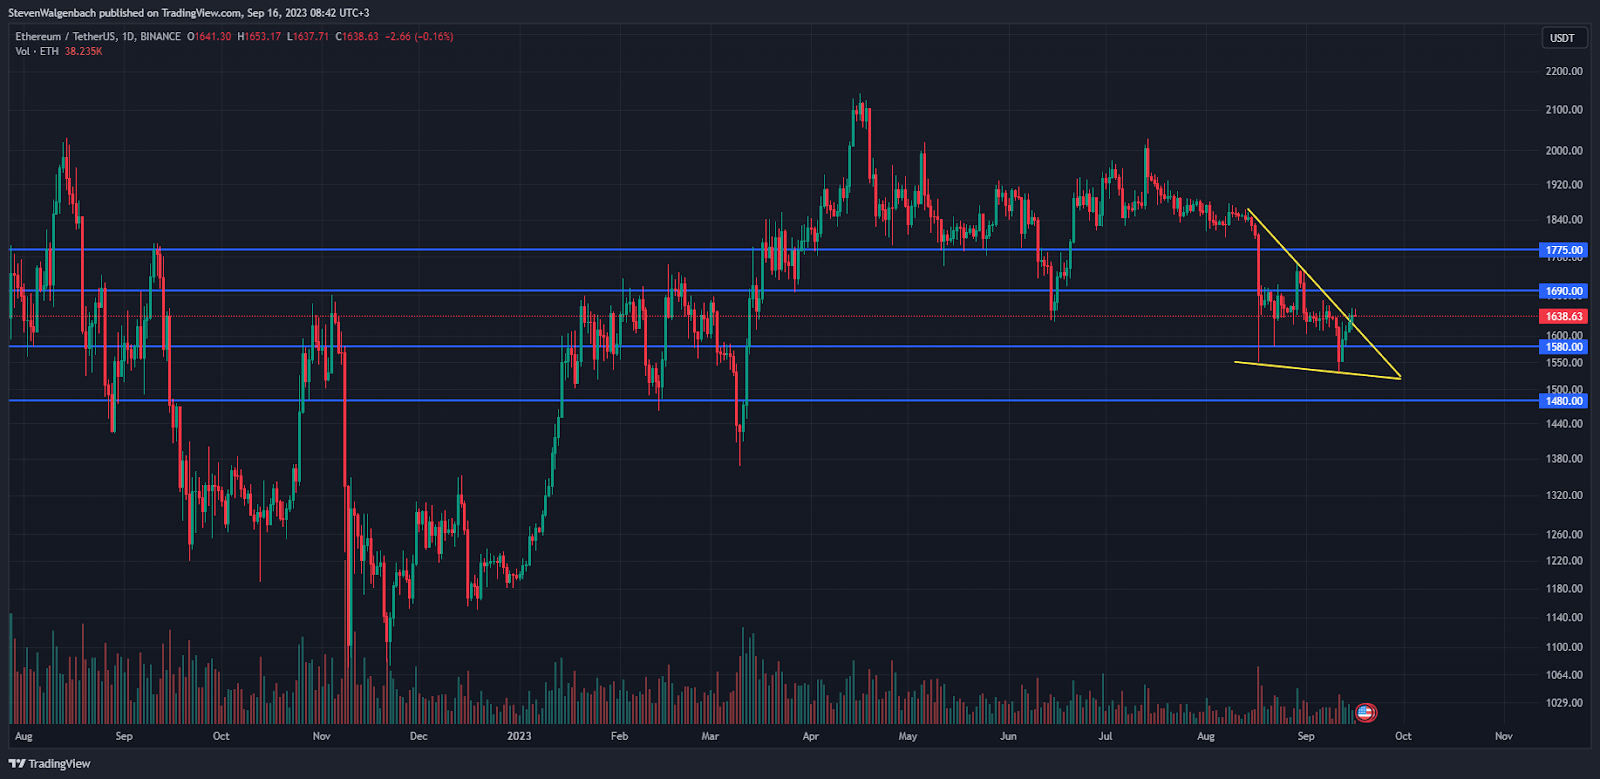 Daily chart for ETH/USDT (Source: TradingView)